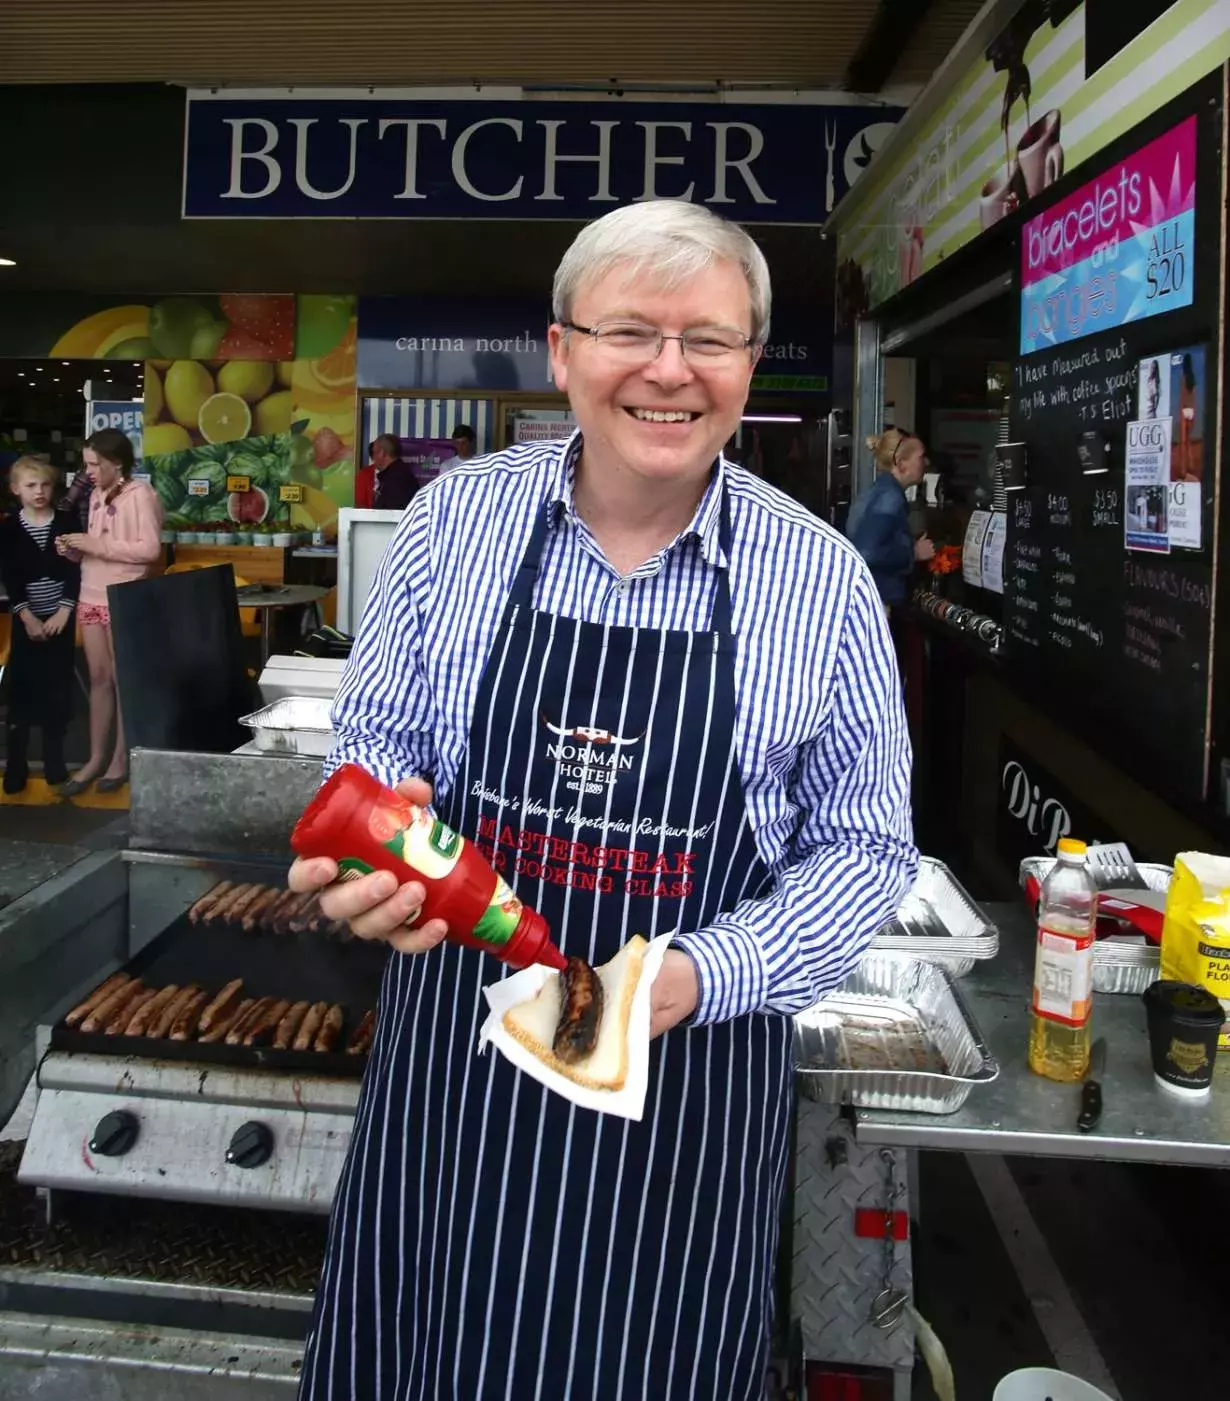 Kevin Rudd smiles at the camera while putting tomato sauce on a sausage at a sausage sizzle.  